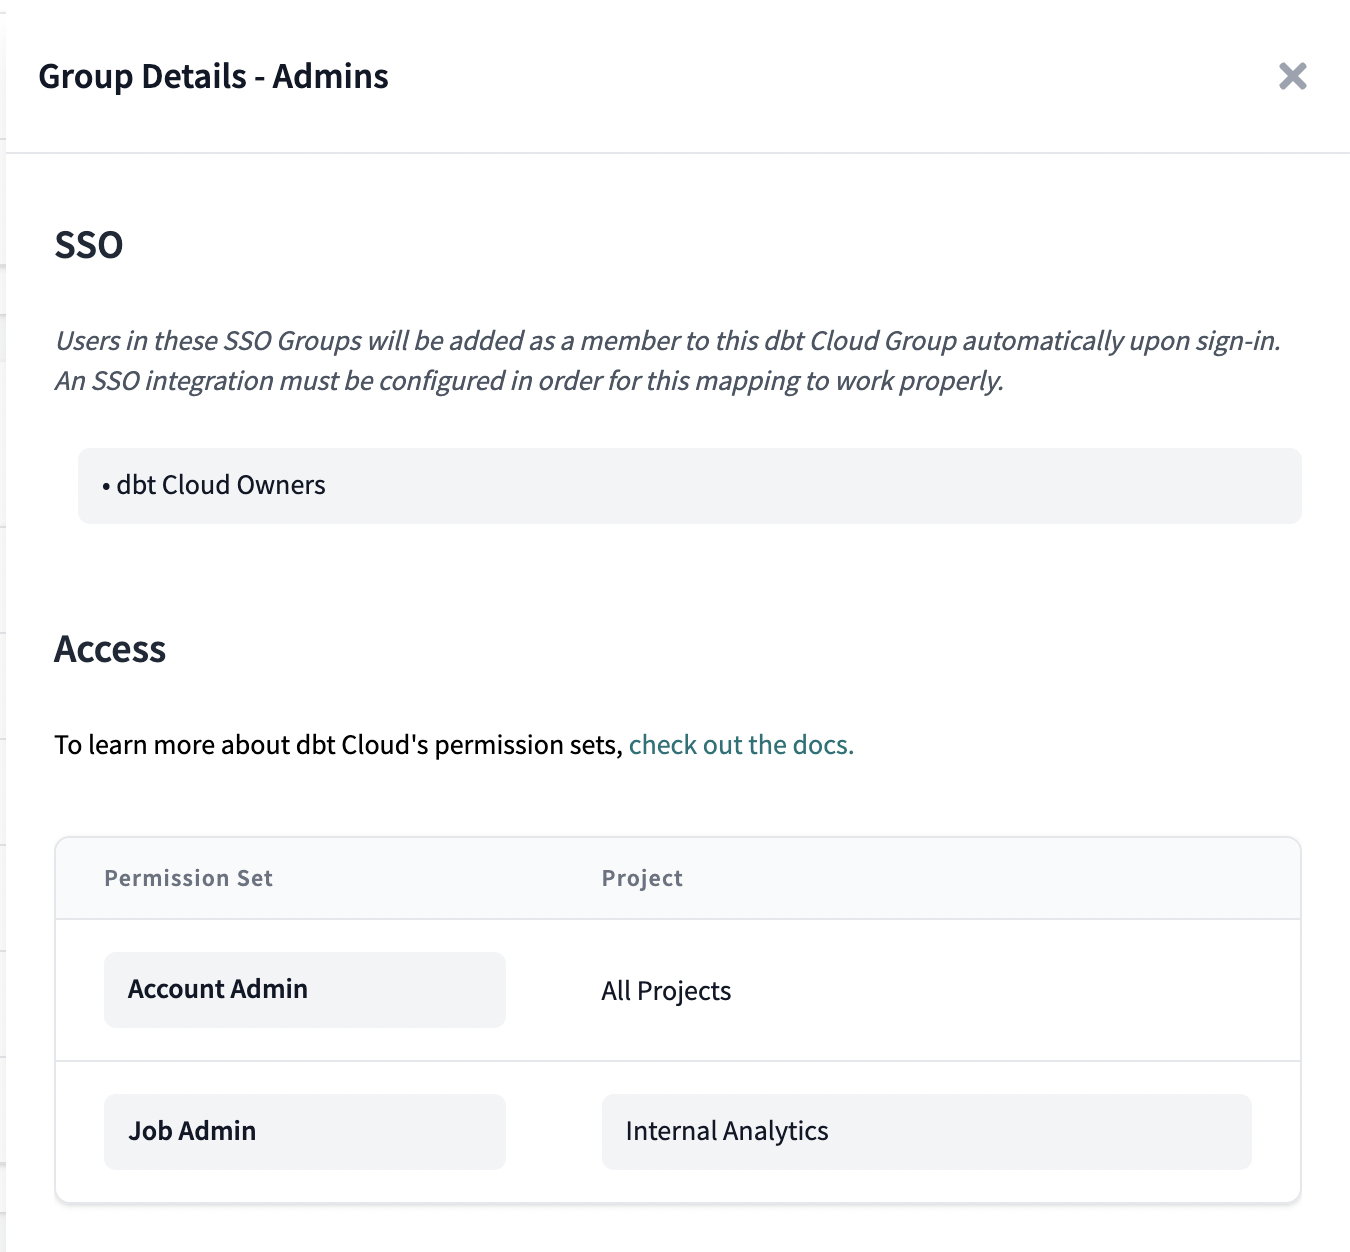 Configuring permissions for the Admins group